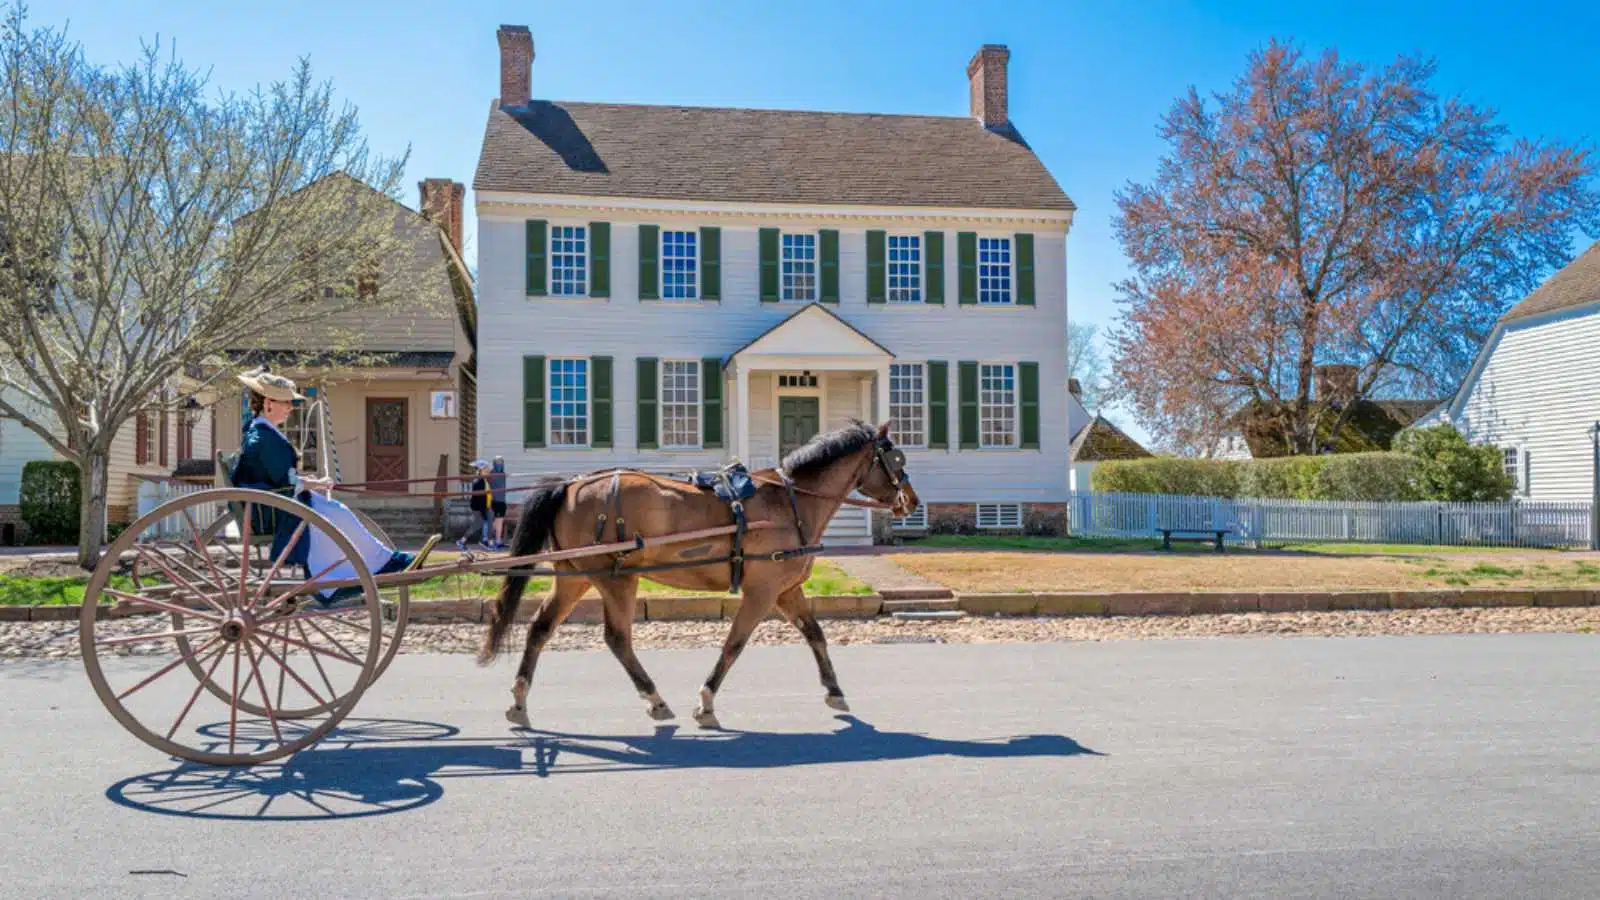 Williamsburg, Virginia, USA: 31st March 2021; Woman riding on a horse and buggy in colonial Williamsburg